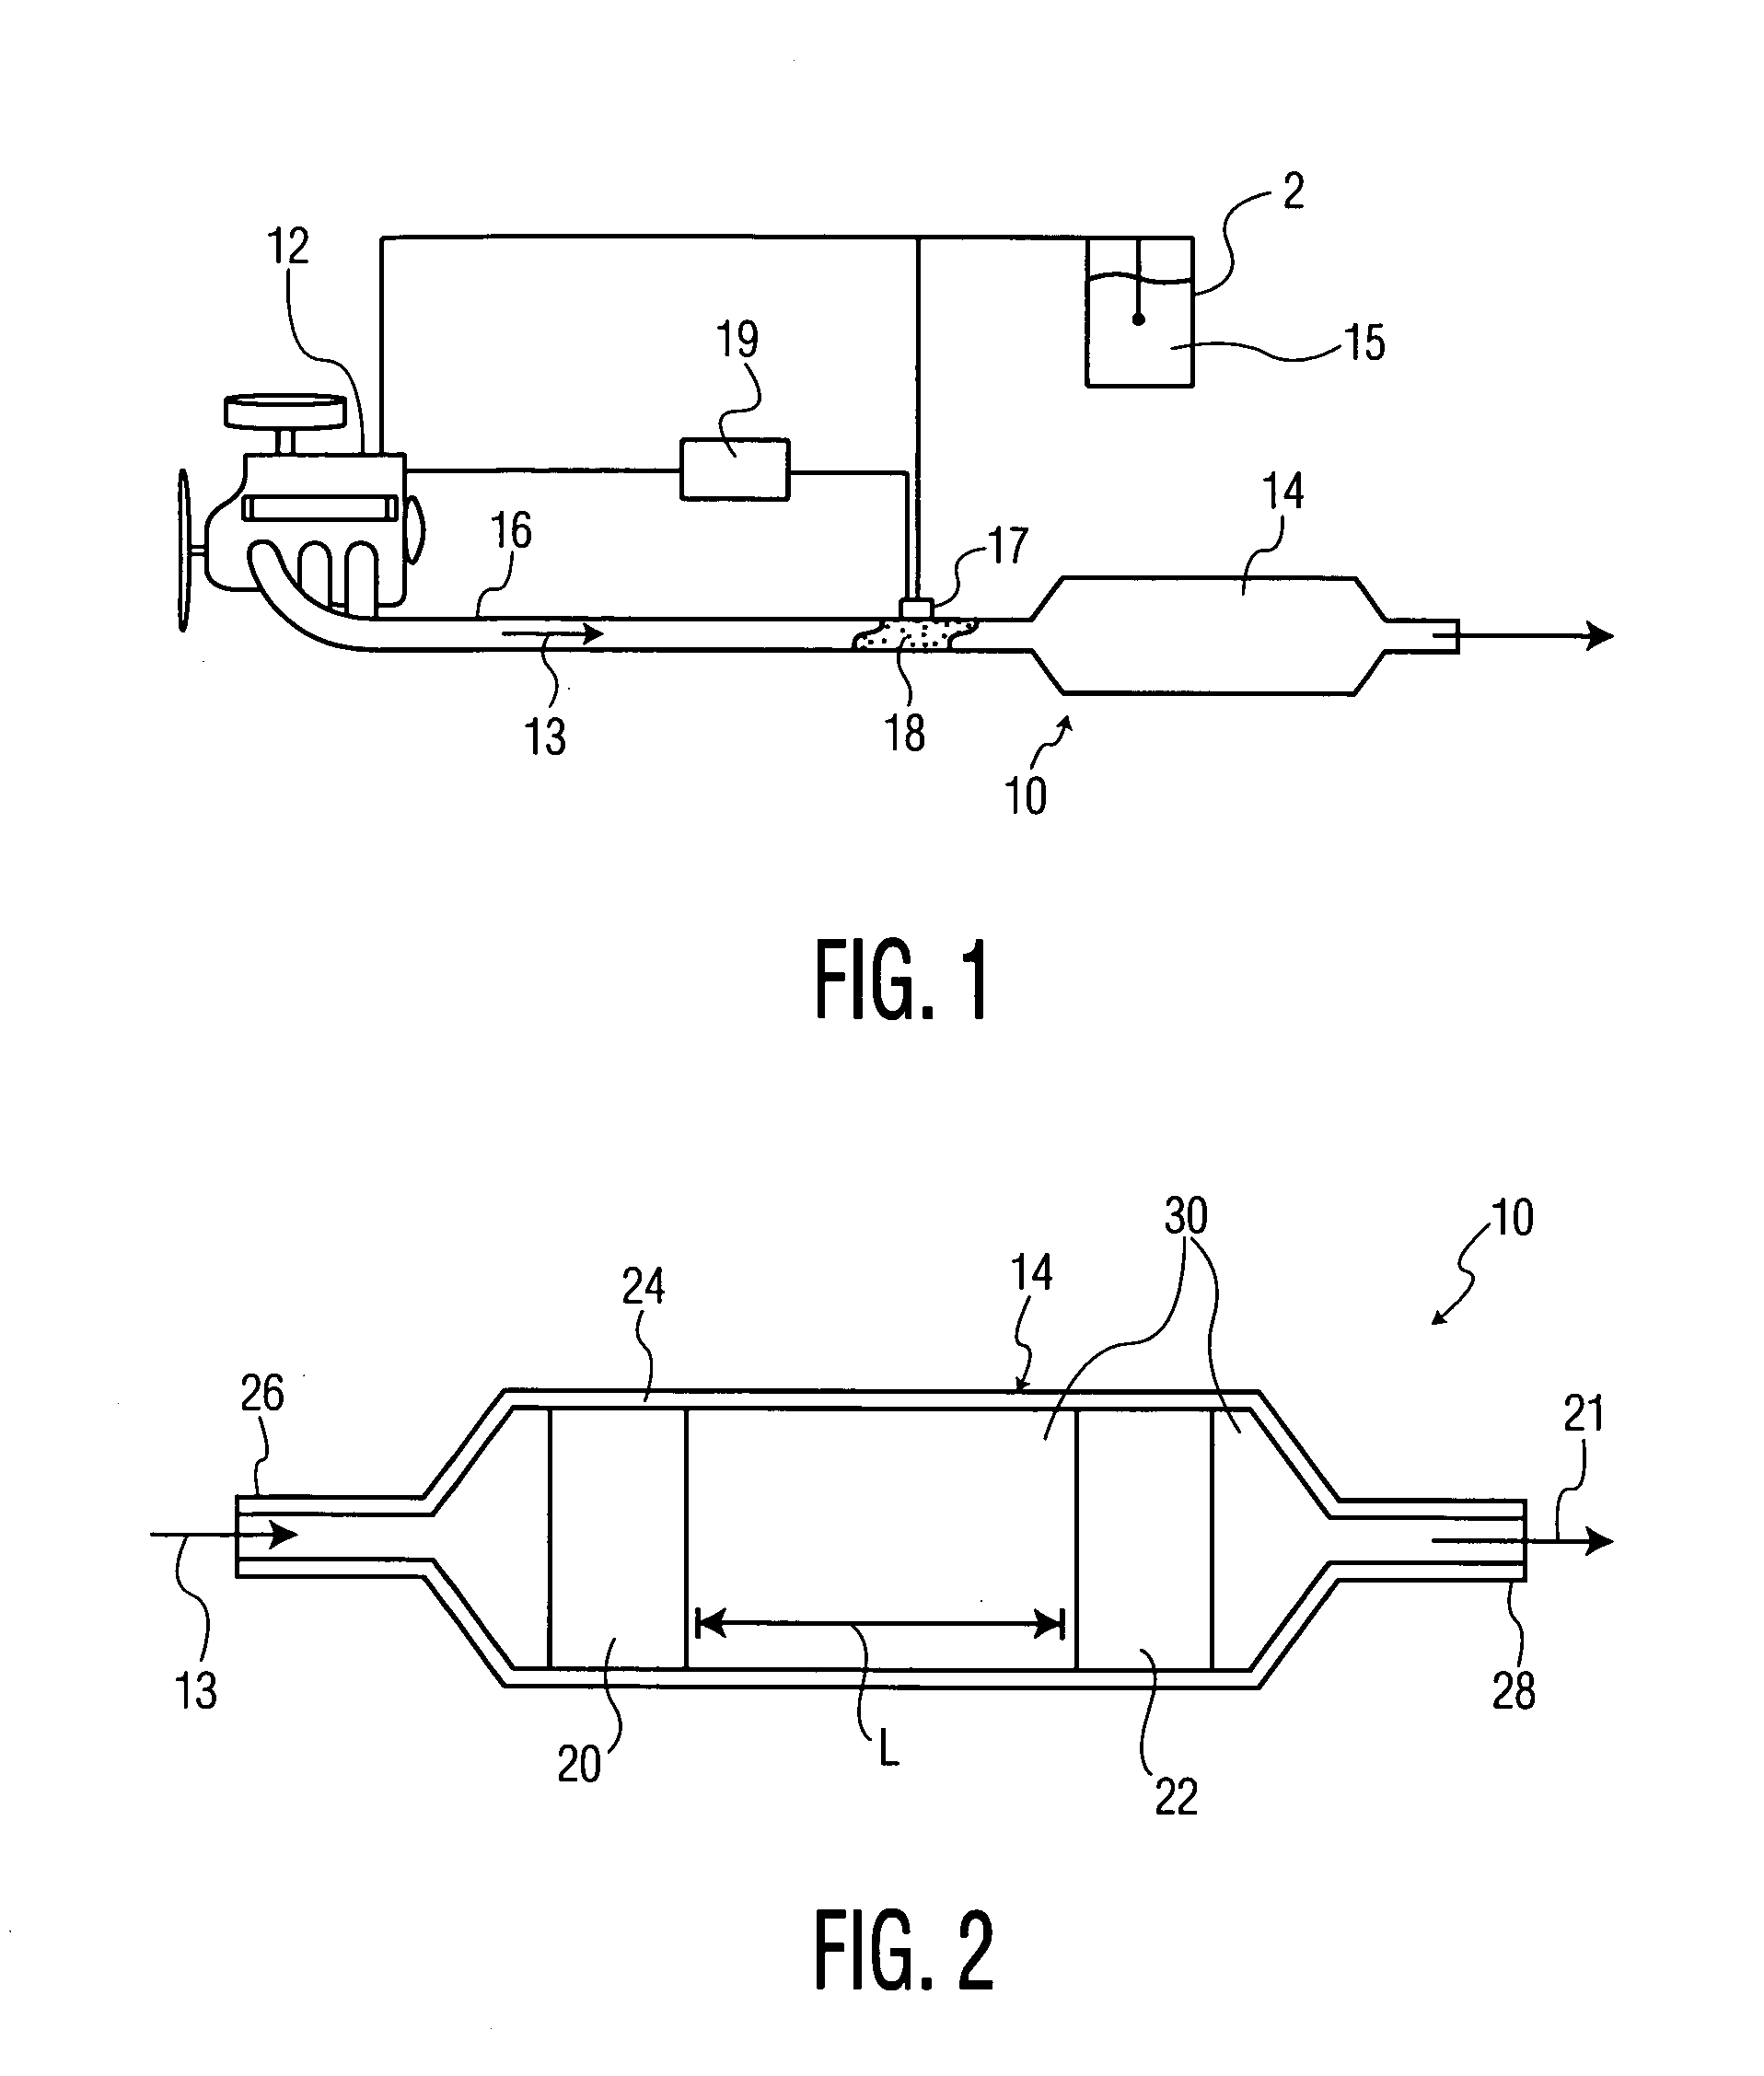 Reformer assisted lean NOx catalyst aftertreatment system and method